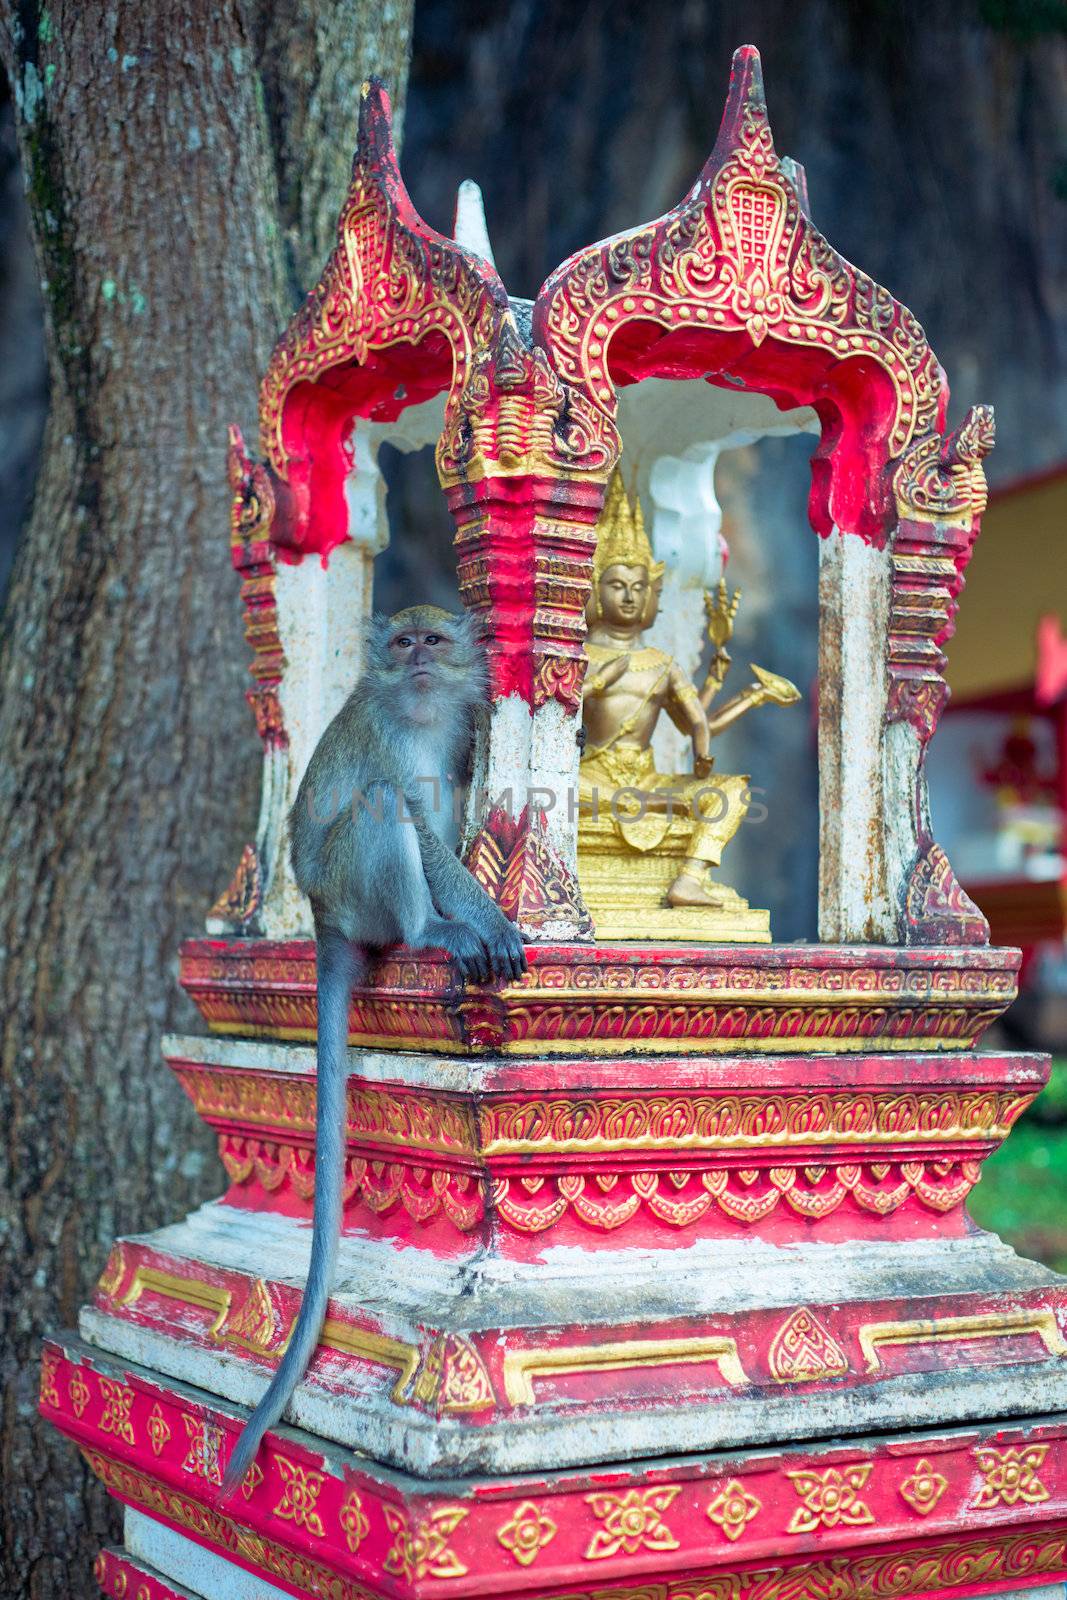 Small monkey sit on shrine at the hill temple in Krabi province, Thailand